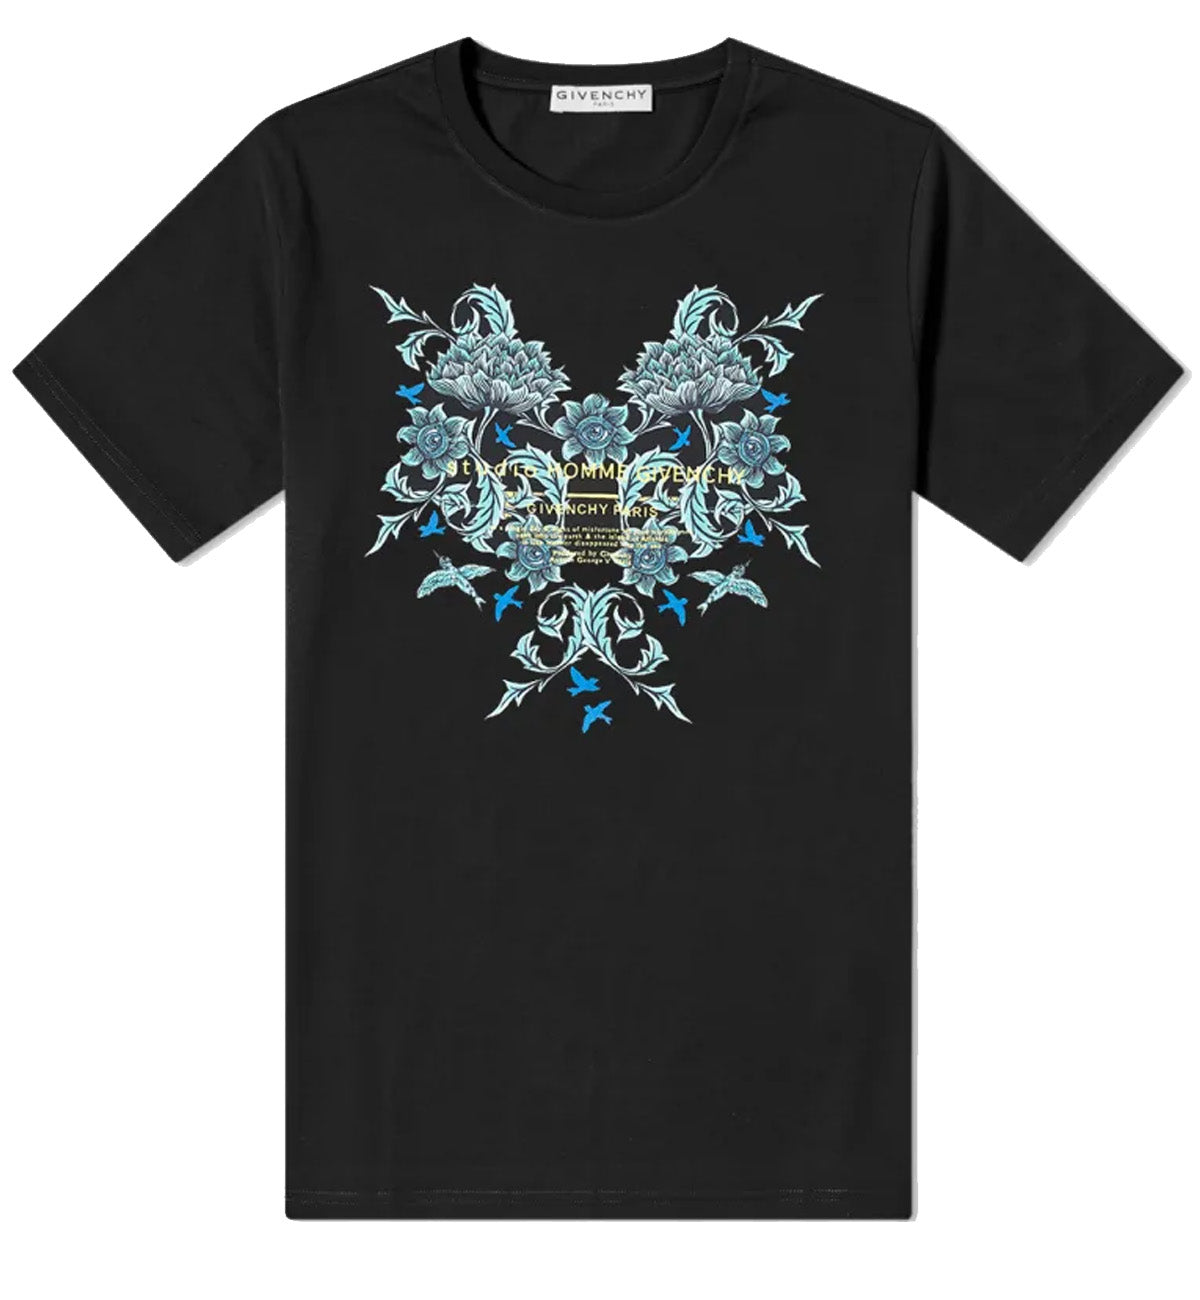 Givenchy Studio Homme Floral Printed T-Shirt (Black)